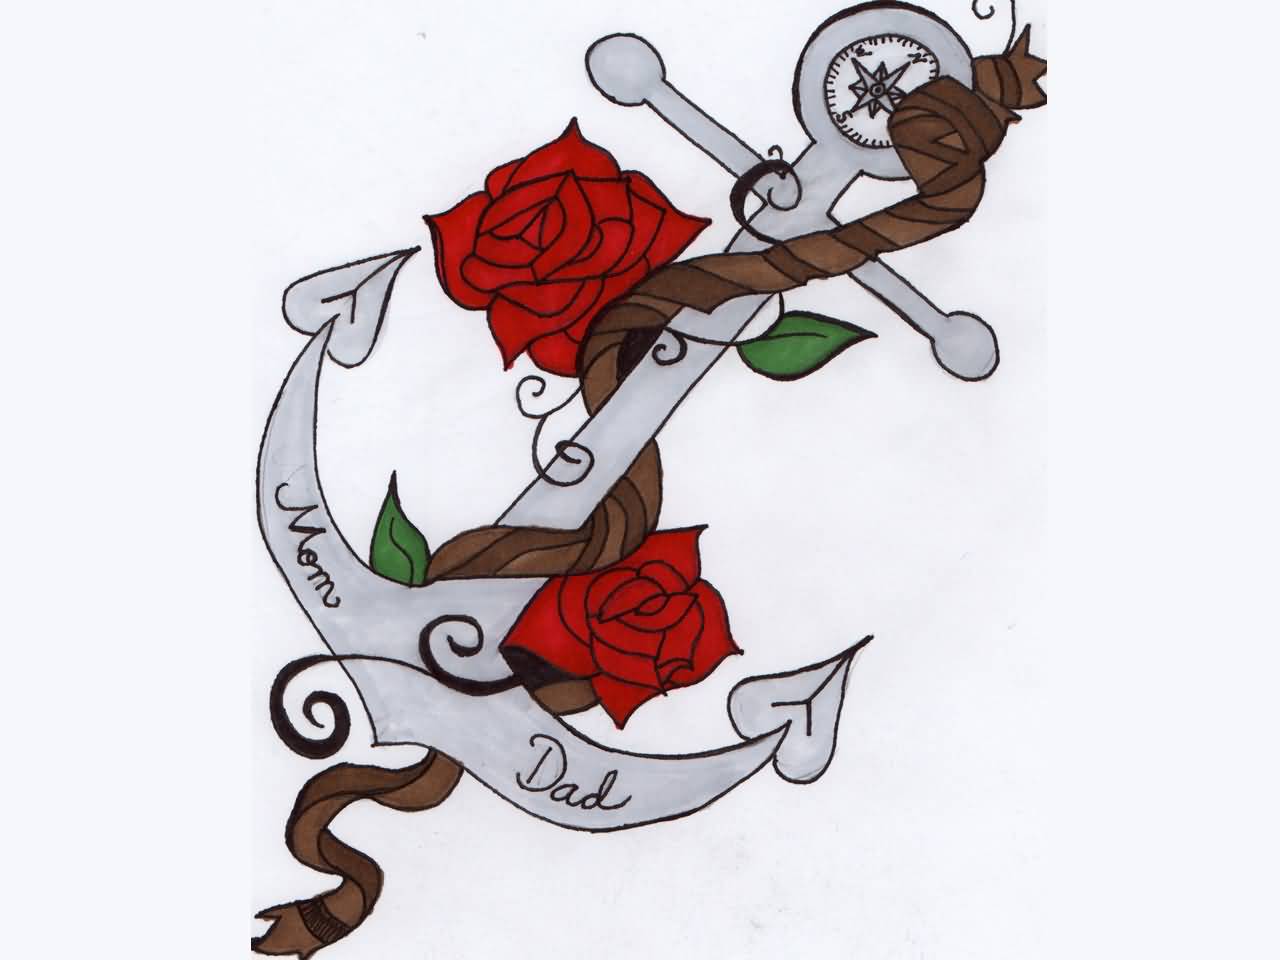 Inspiring Anchor With Roses Tattoo Design.